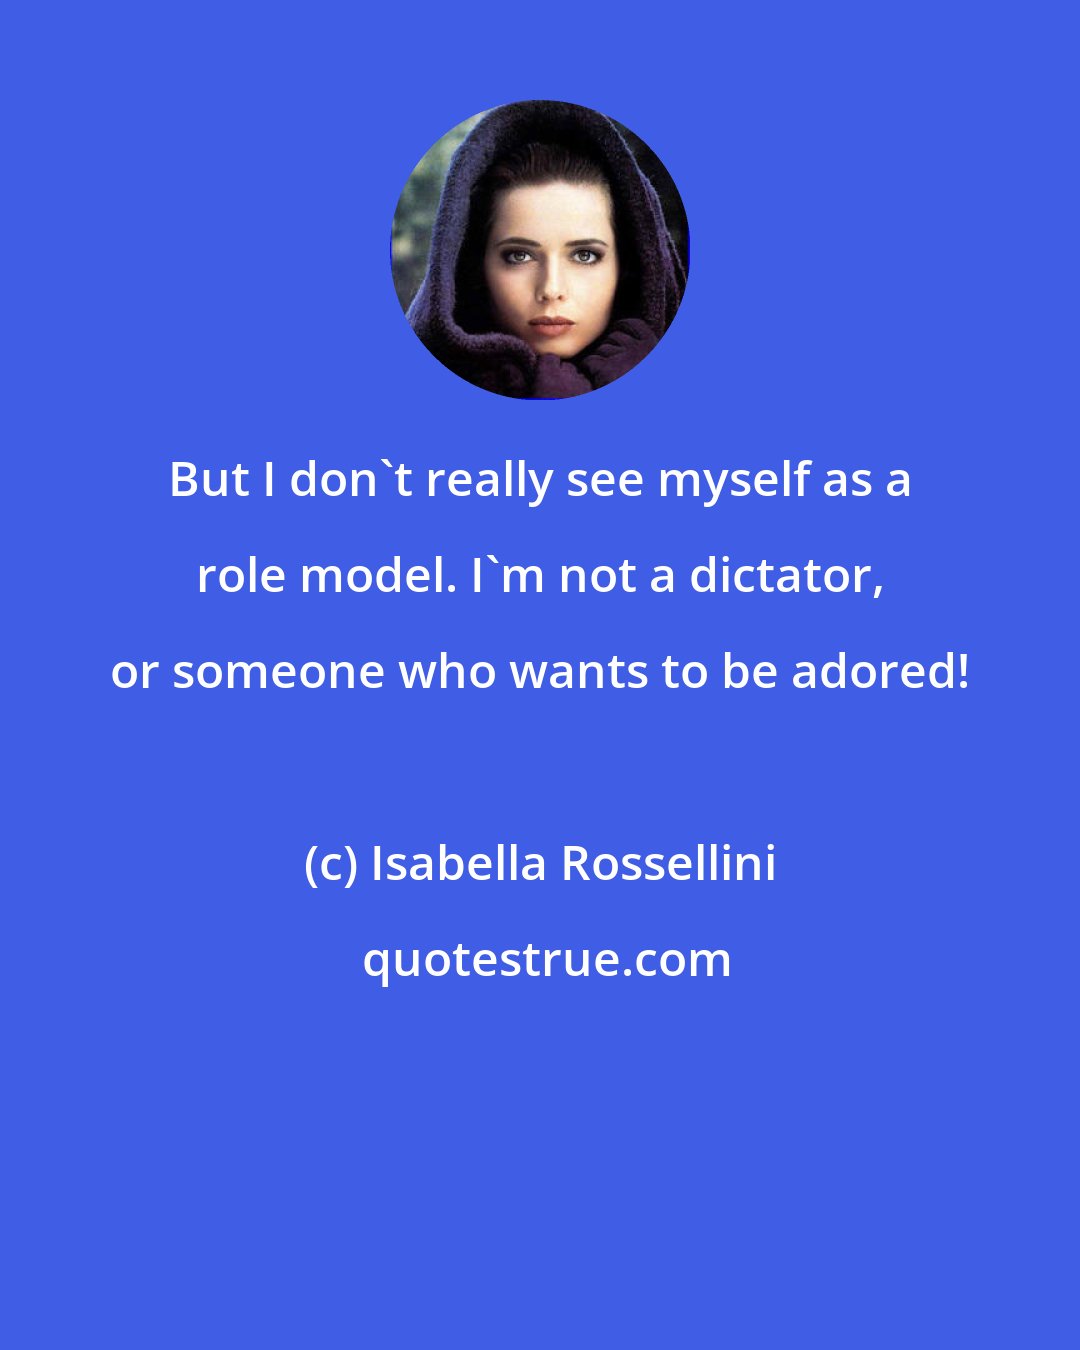 Isabella Rossellini: But I don't really see myself as a role model. I'm not a dictator, or someone who wants to be adored!